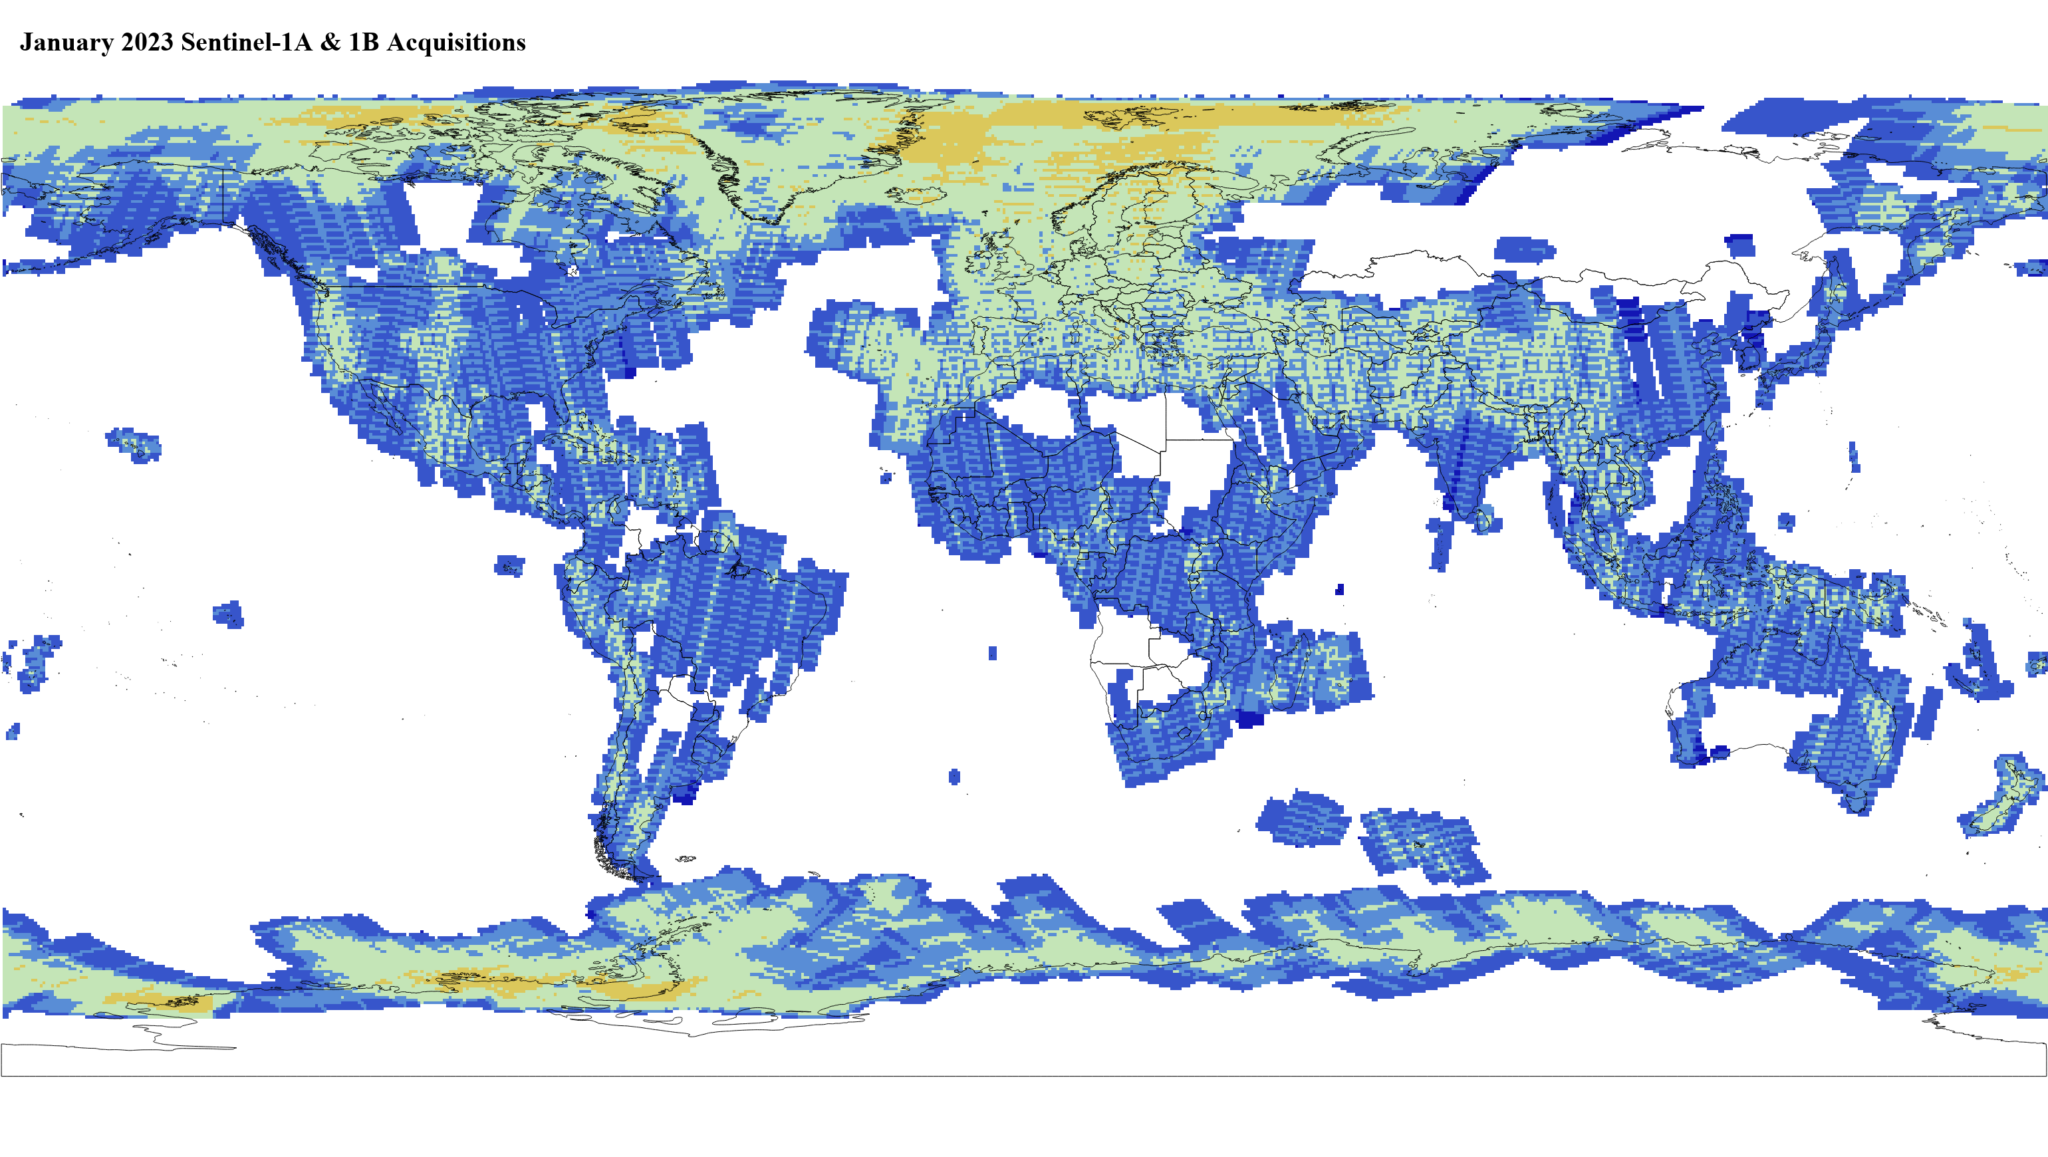 Heat map of Sentinel-1A and -1B GRD global acquisitions January 2023